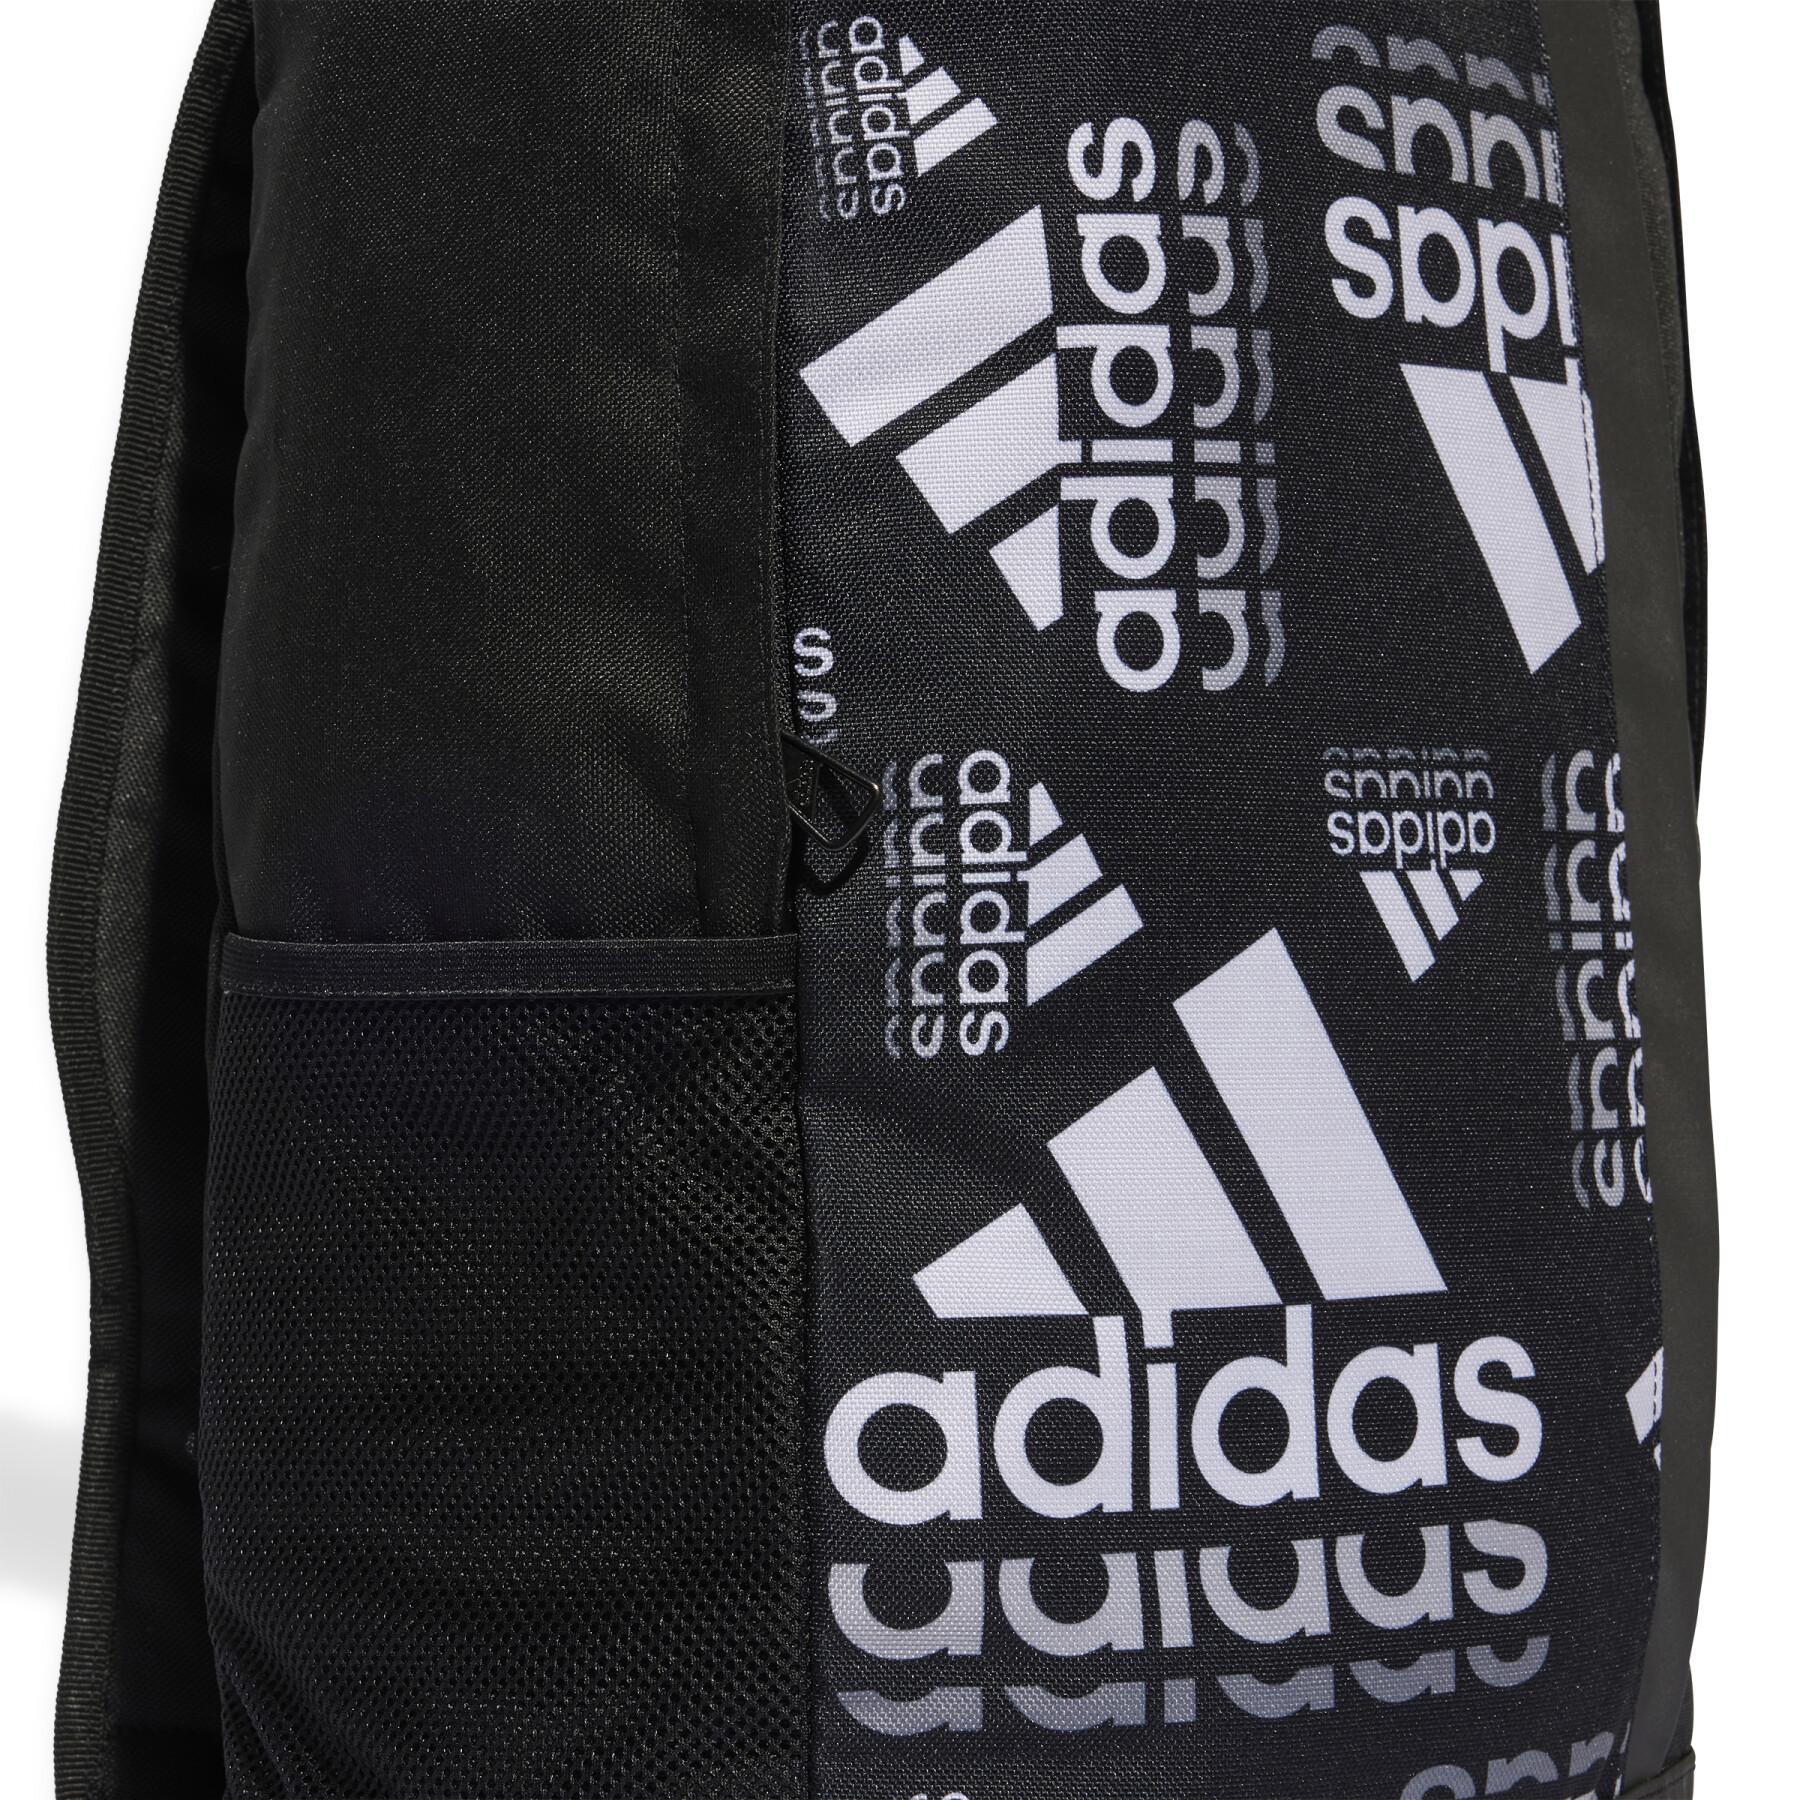 Backpack adidas Linear Graphic